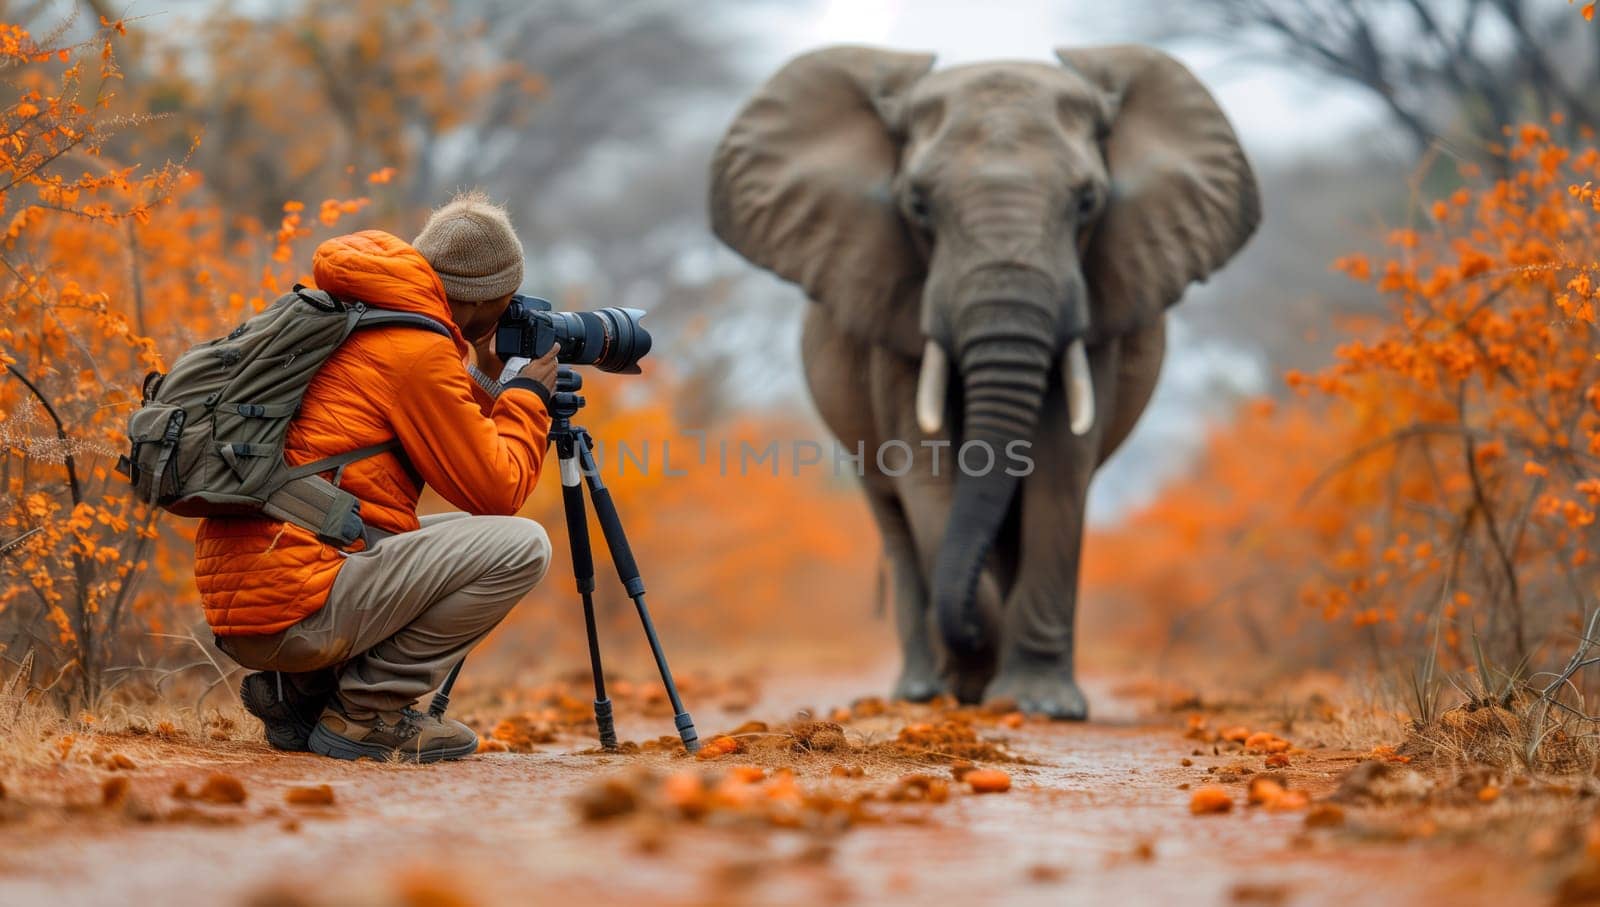 A man is capturing a photo of an elephant in its natural environment, surrounded by trees and water in the ecoregion, showcasing the beauty of working animals in this biome